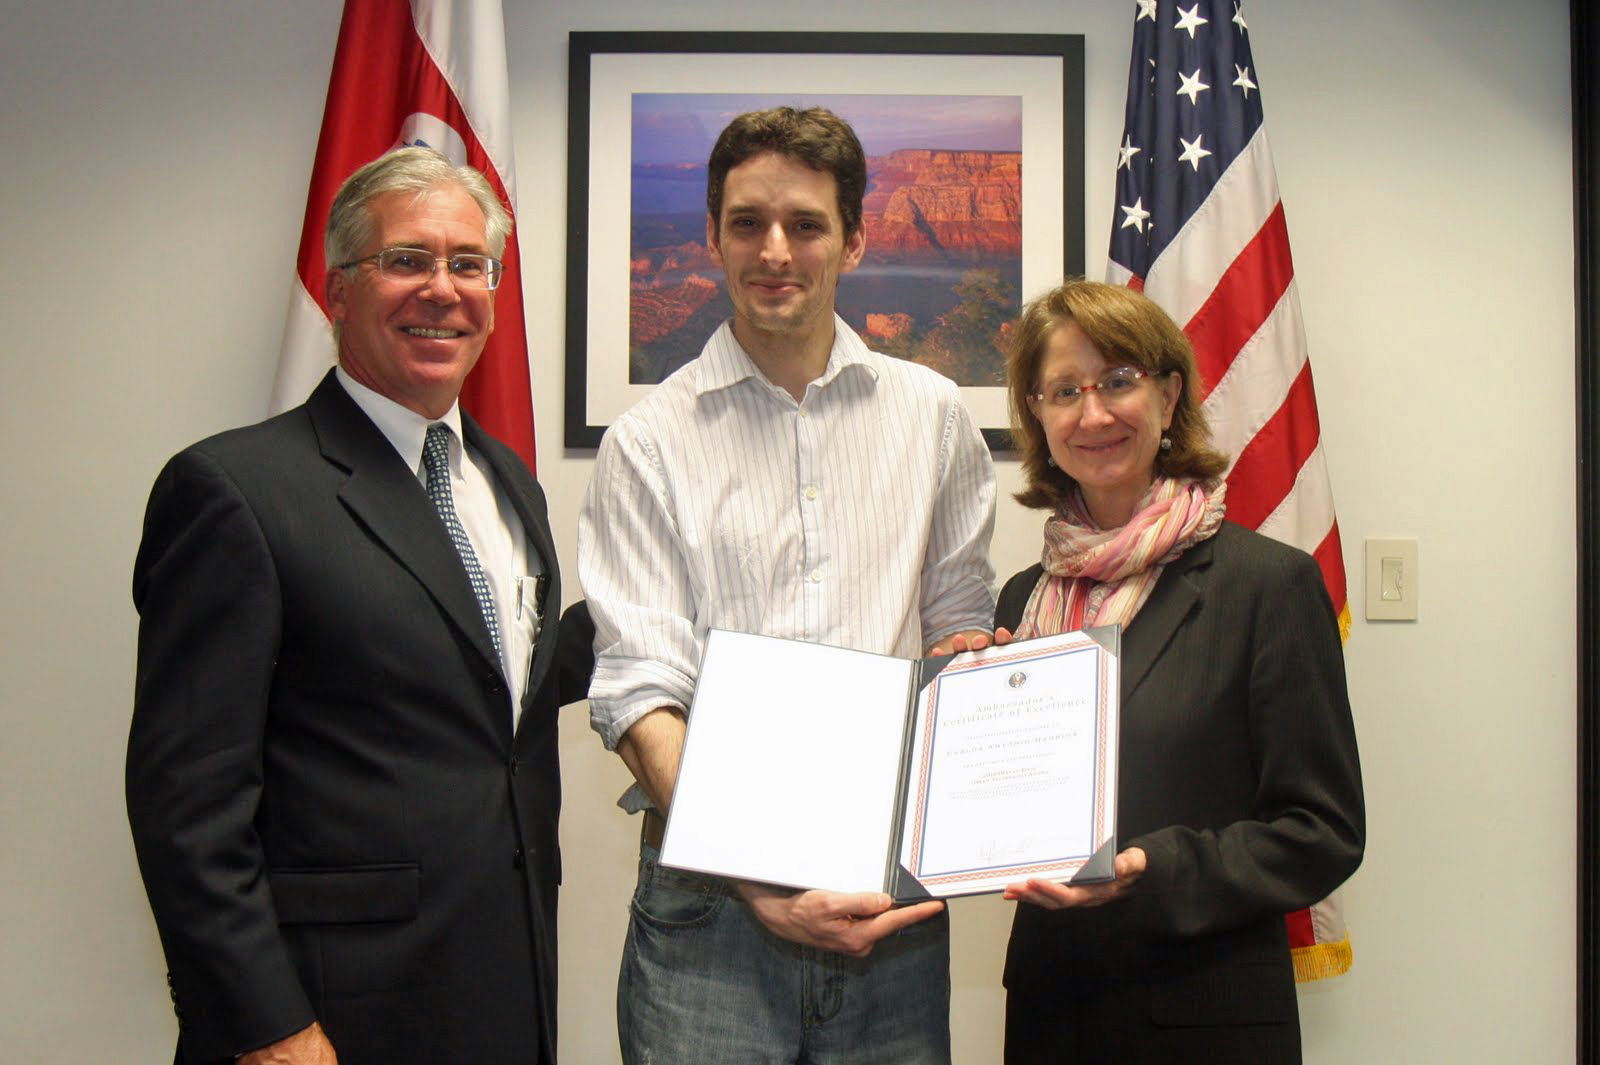 Carlos BARRIOS Receives Certificate of Excellence from Anne Slaughter Andrew, US Ambassador to Costa Rica